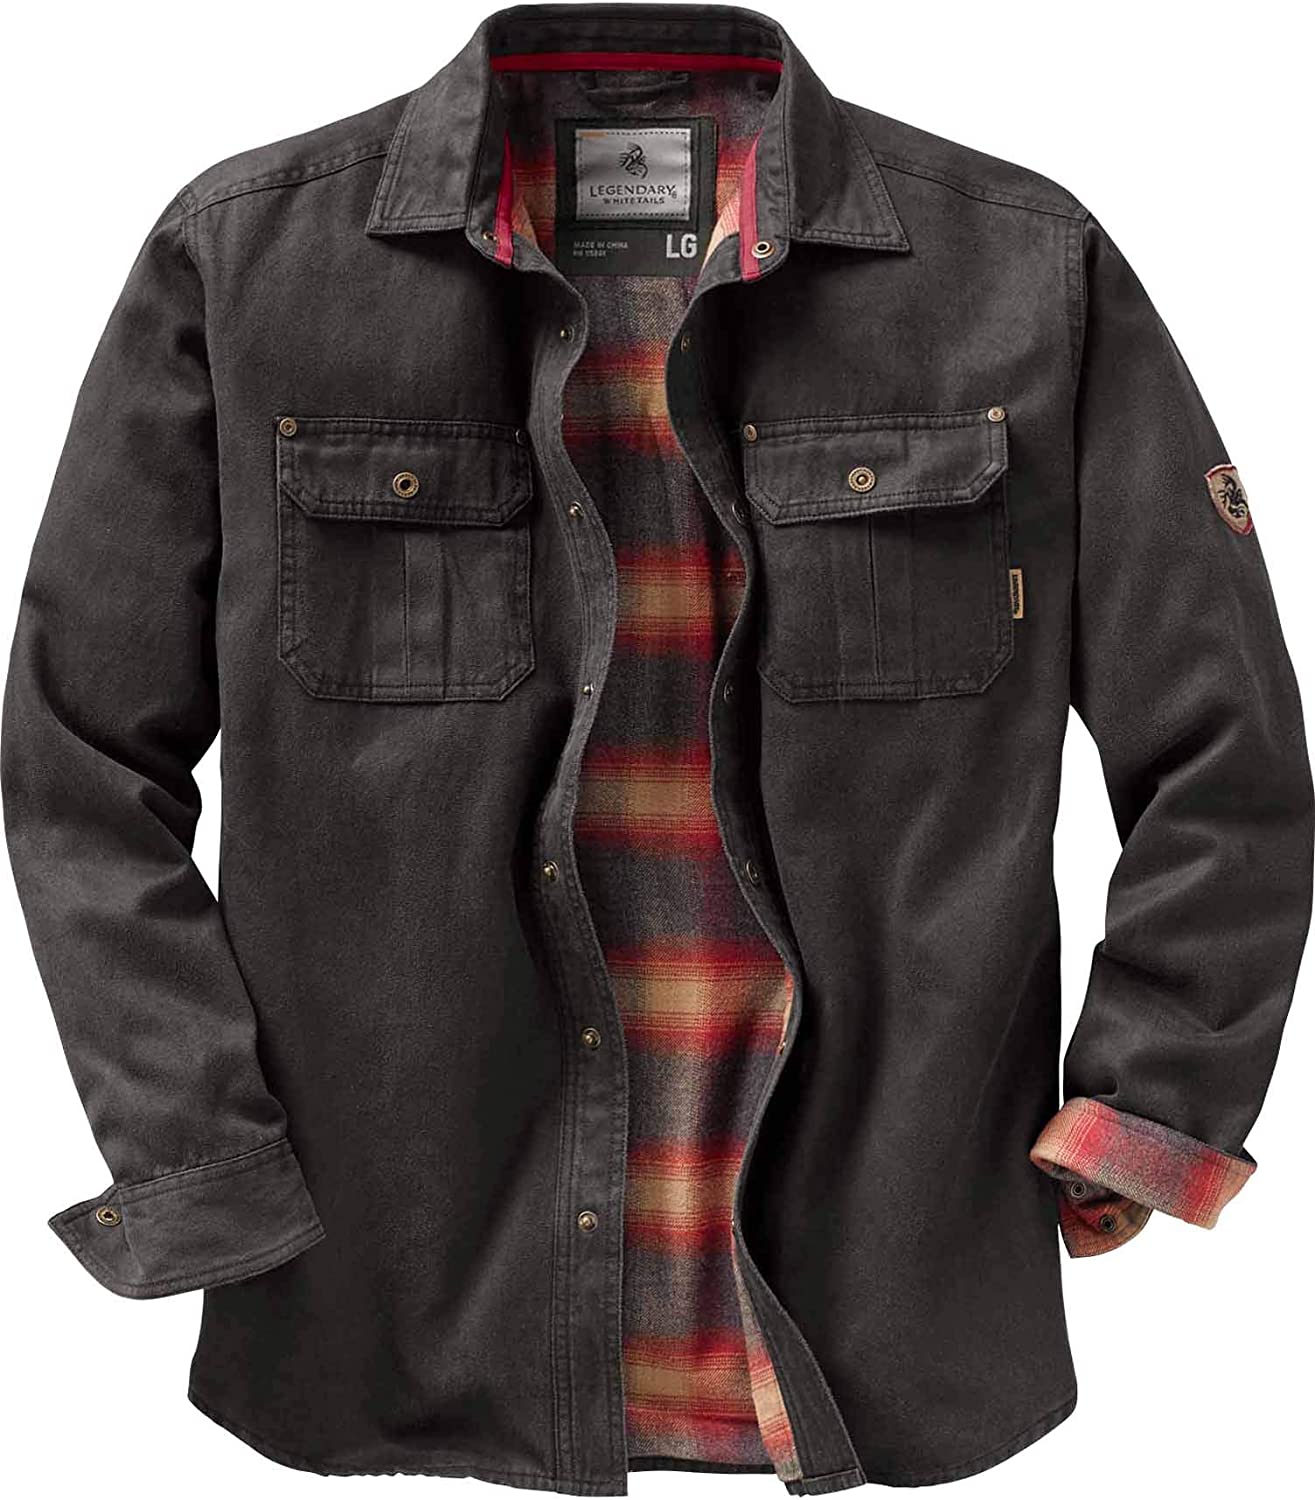 's Journeyman Flannel Lined Rugged Shirt Jacket